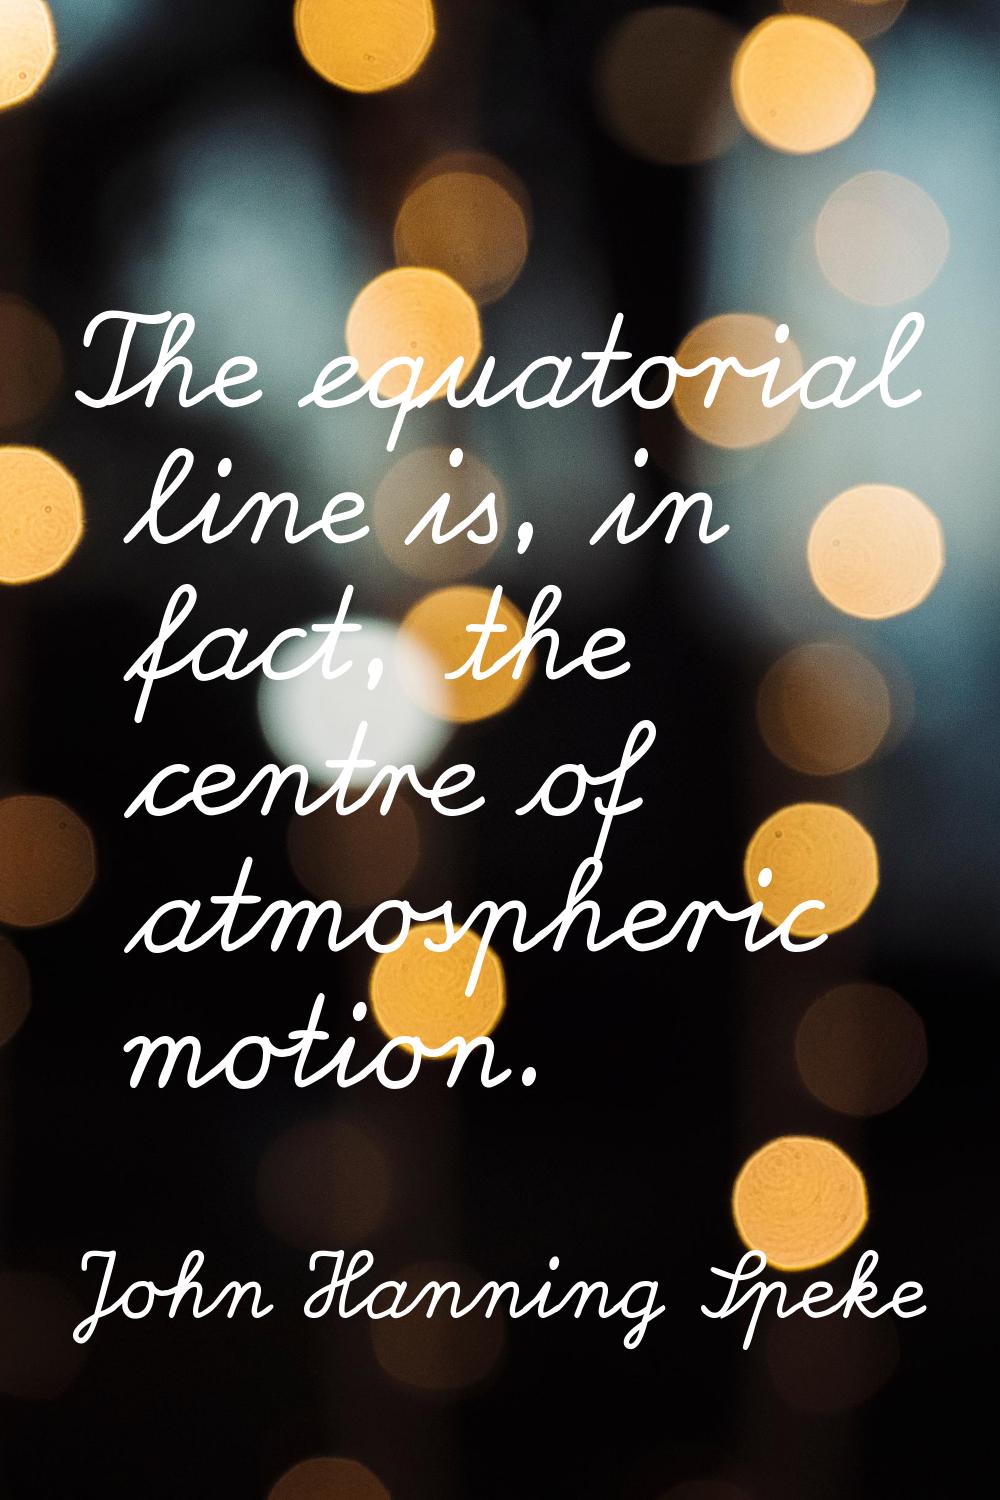 The equatorial line is, in fact, the centre of atmospheric motion.